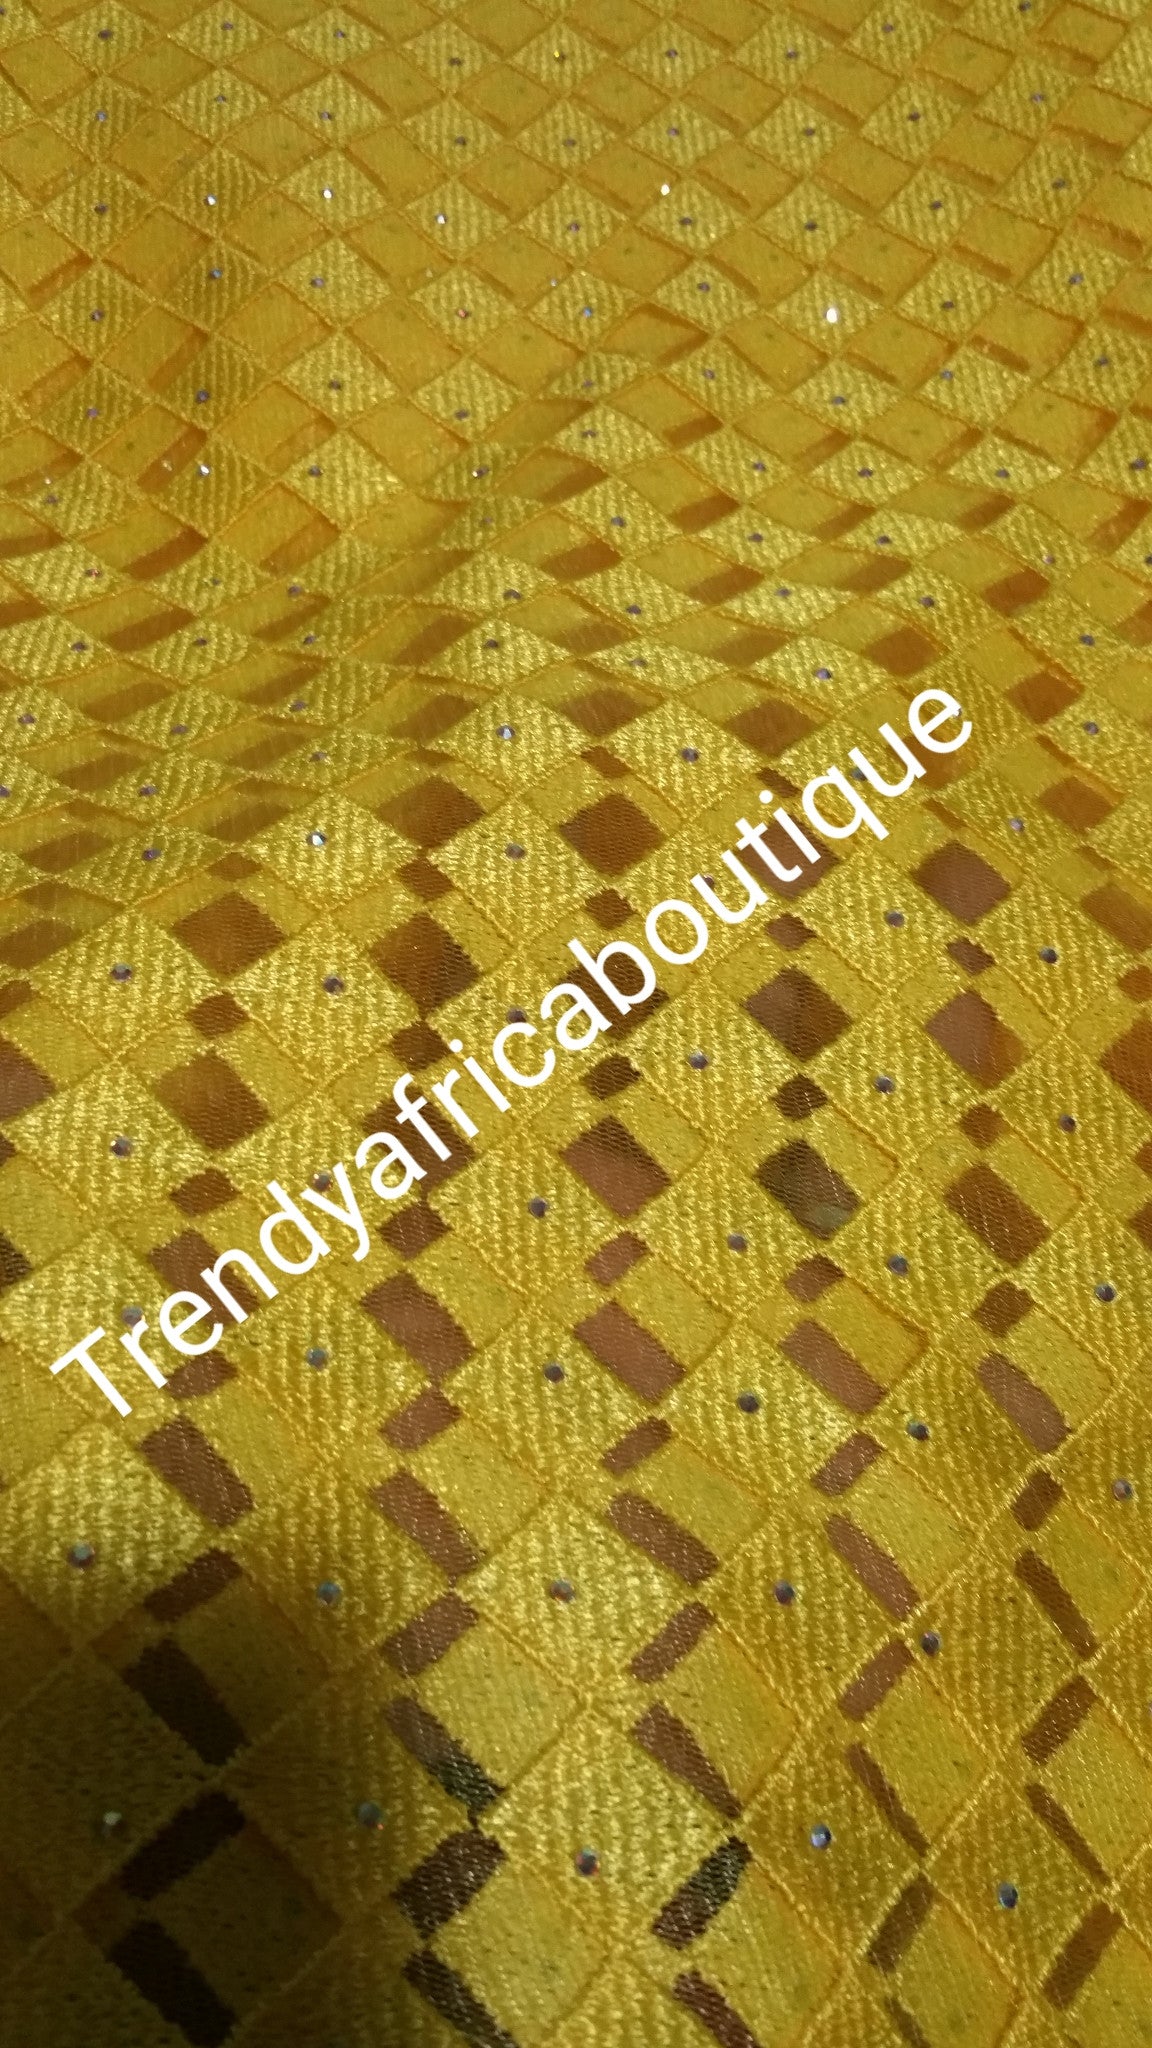 Clearance: African French lace fabric in verbrant yellow. All over crystals stones. Sold per 5 yards.